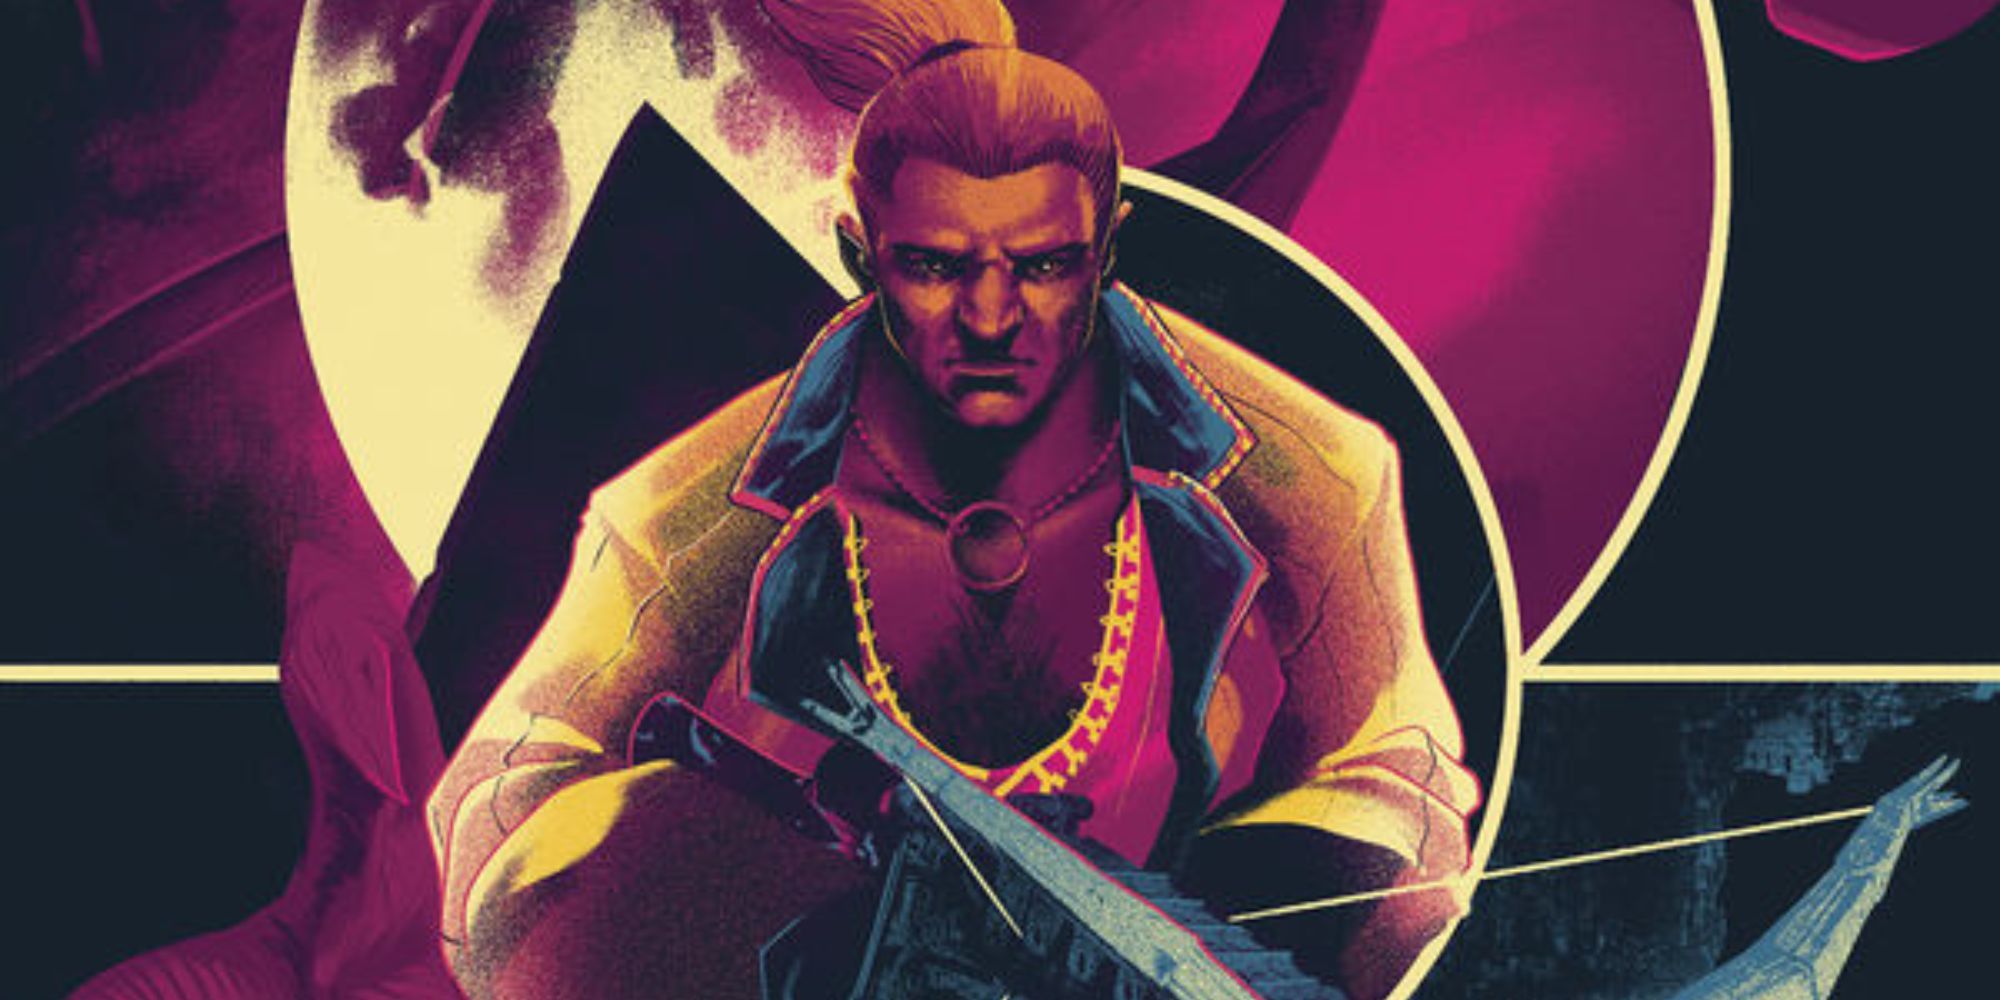 Image shows Varric from Dragon Age on the cover of a comic book.